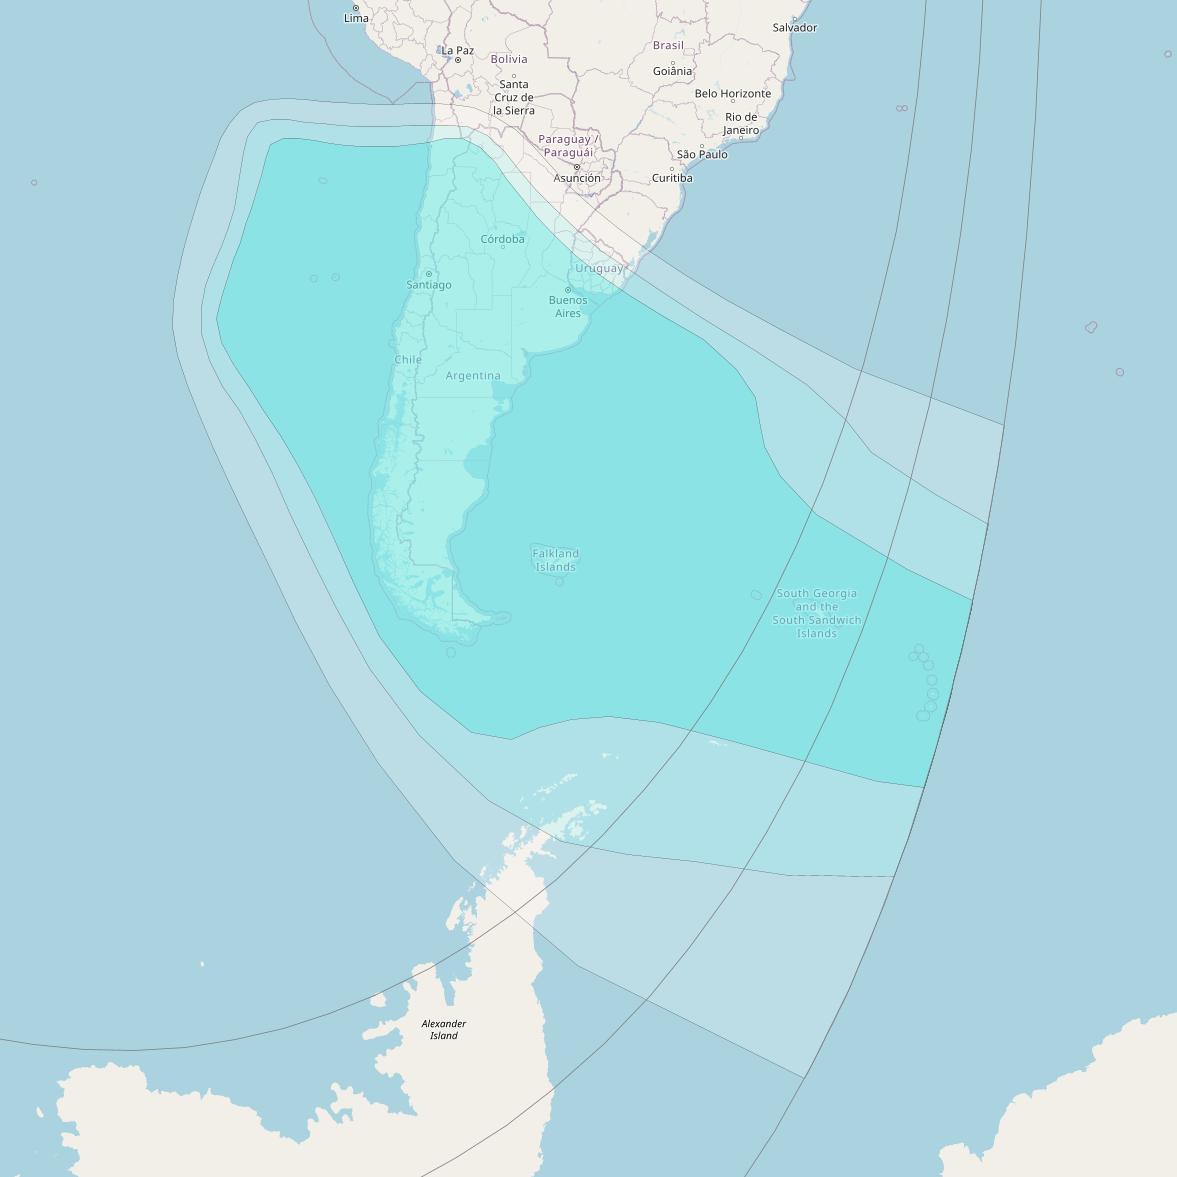 Inmarsat-4F3 at 98° W downlink L-band R004 Regional Spot beam coverage map